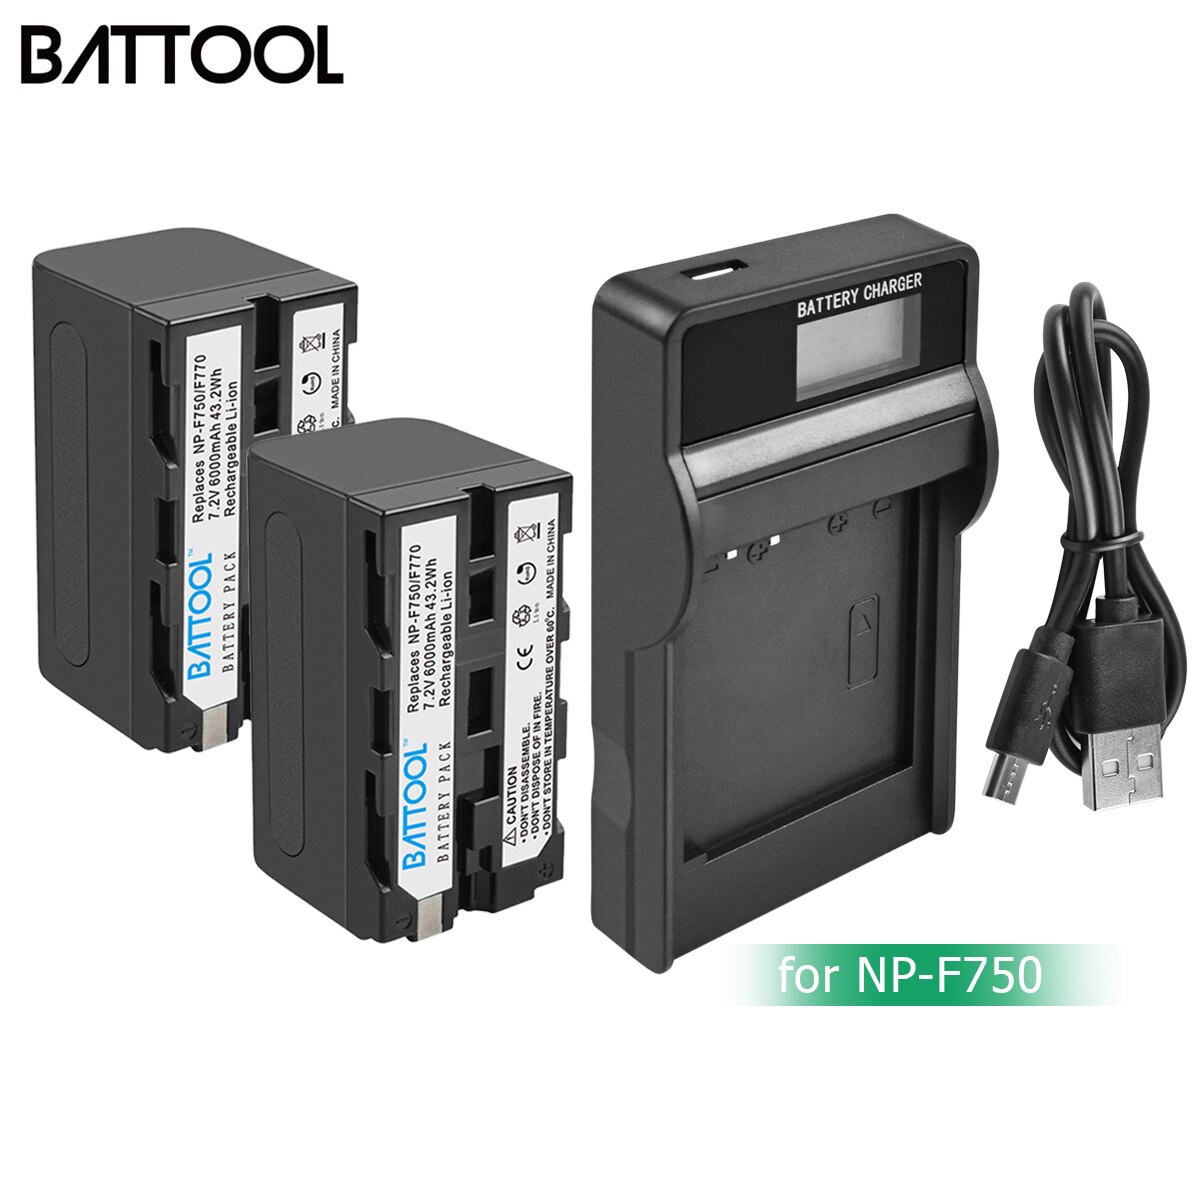 BATTOOL 6000mAh NP-F770 NP-F750 NP F770 np f750 NPF770 750 Batteries+LCD Charger For Sony NP-F550 NP-F770 NP-F750 F960 F970